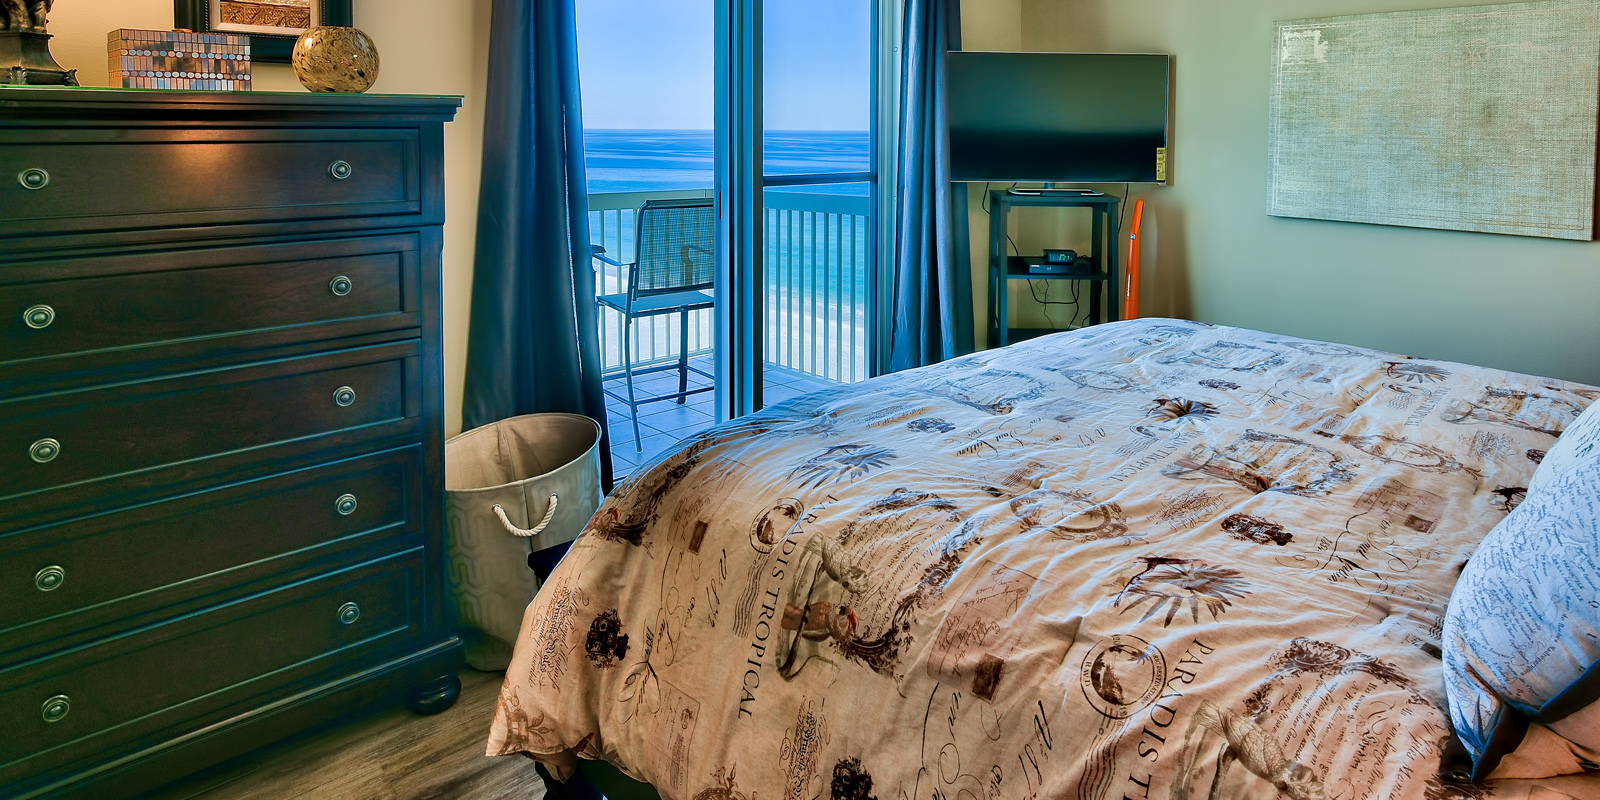 Contact Pelican Beach 1201 for great Vacation rentals in Destin FL